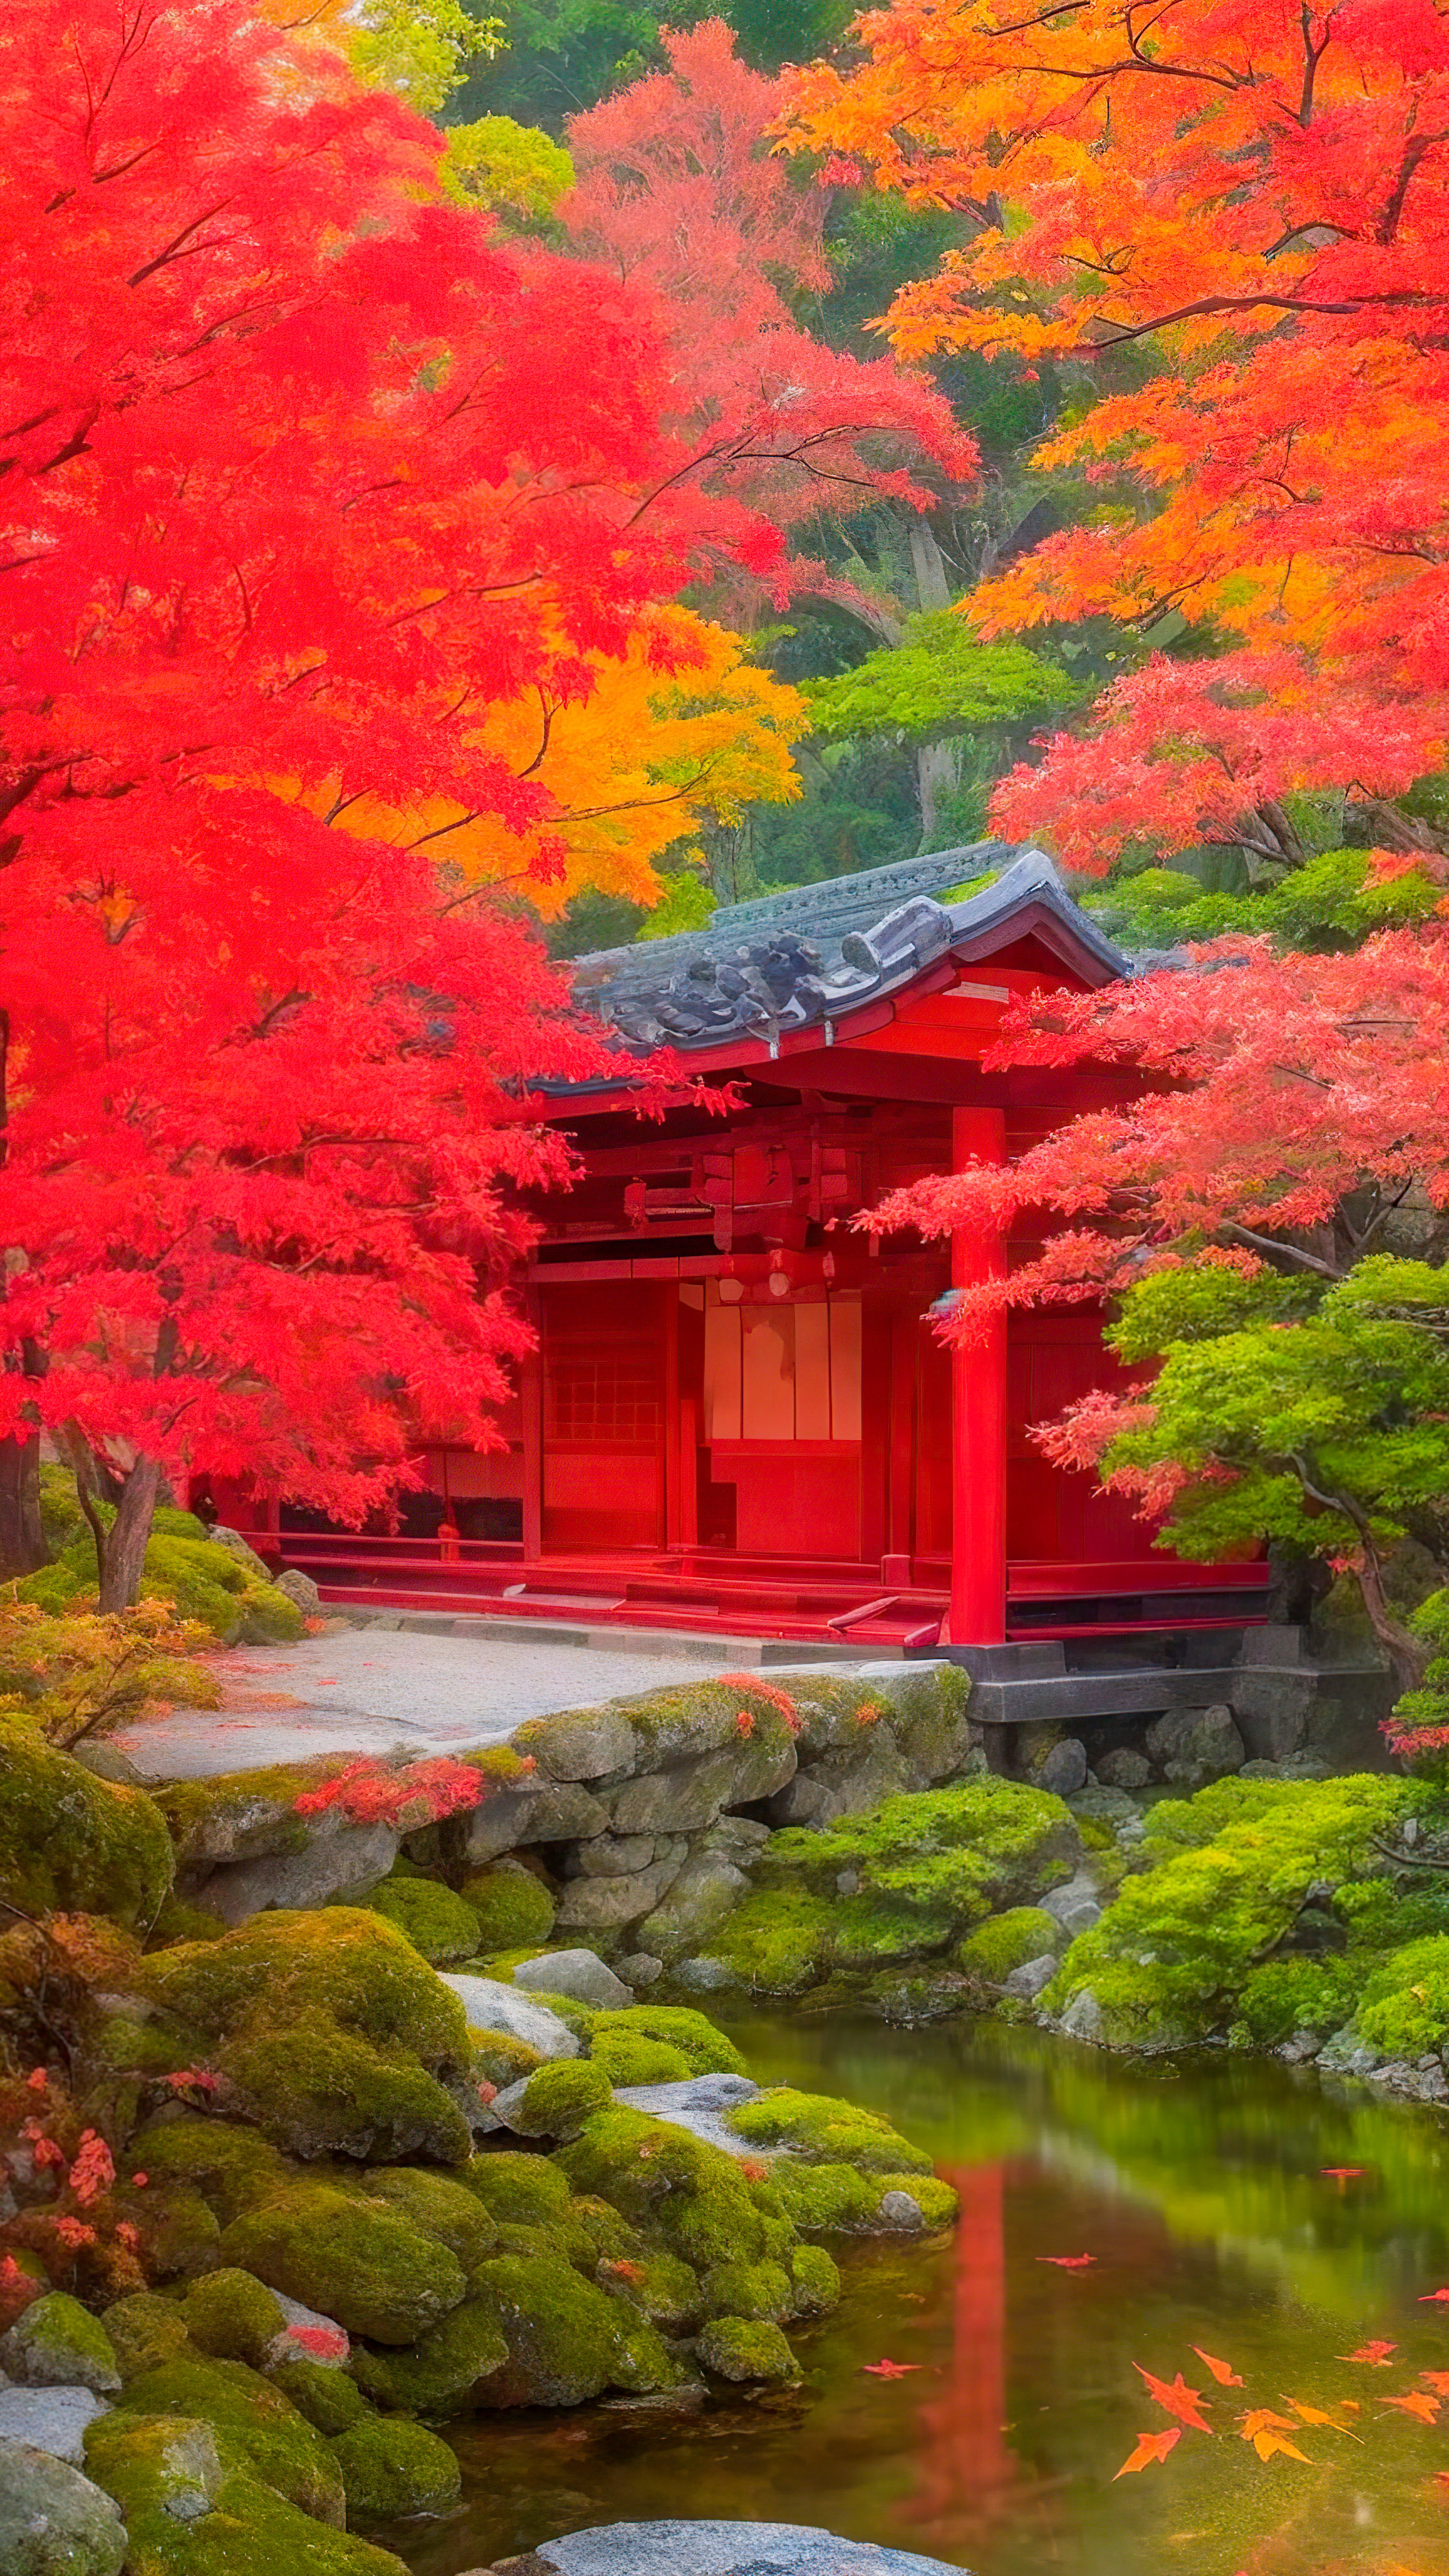 Adorn your lock screen with our cool iPhone lock screen wallpaper, showcasing a tranquil Japanese garden in autumn, with vibrant red maple leaves against a traditional architecture.